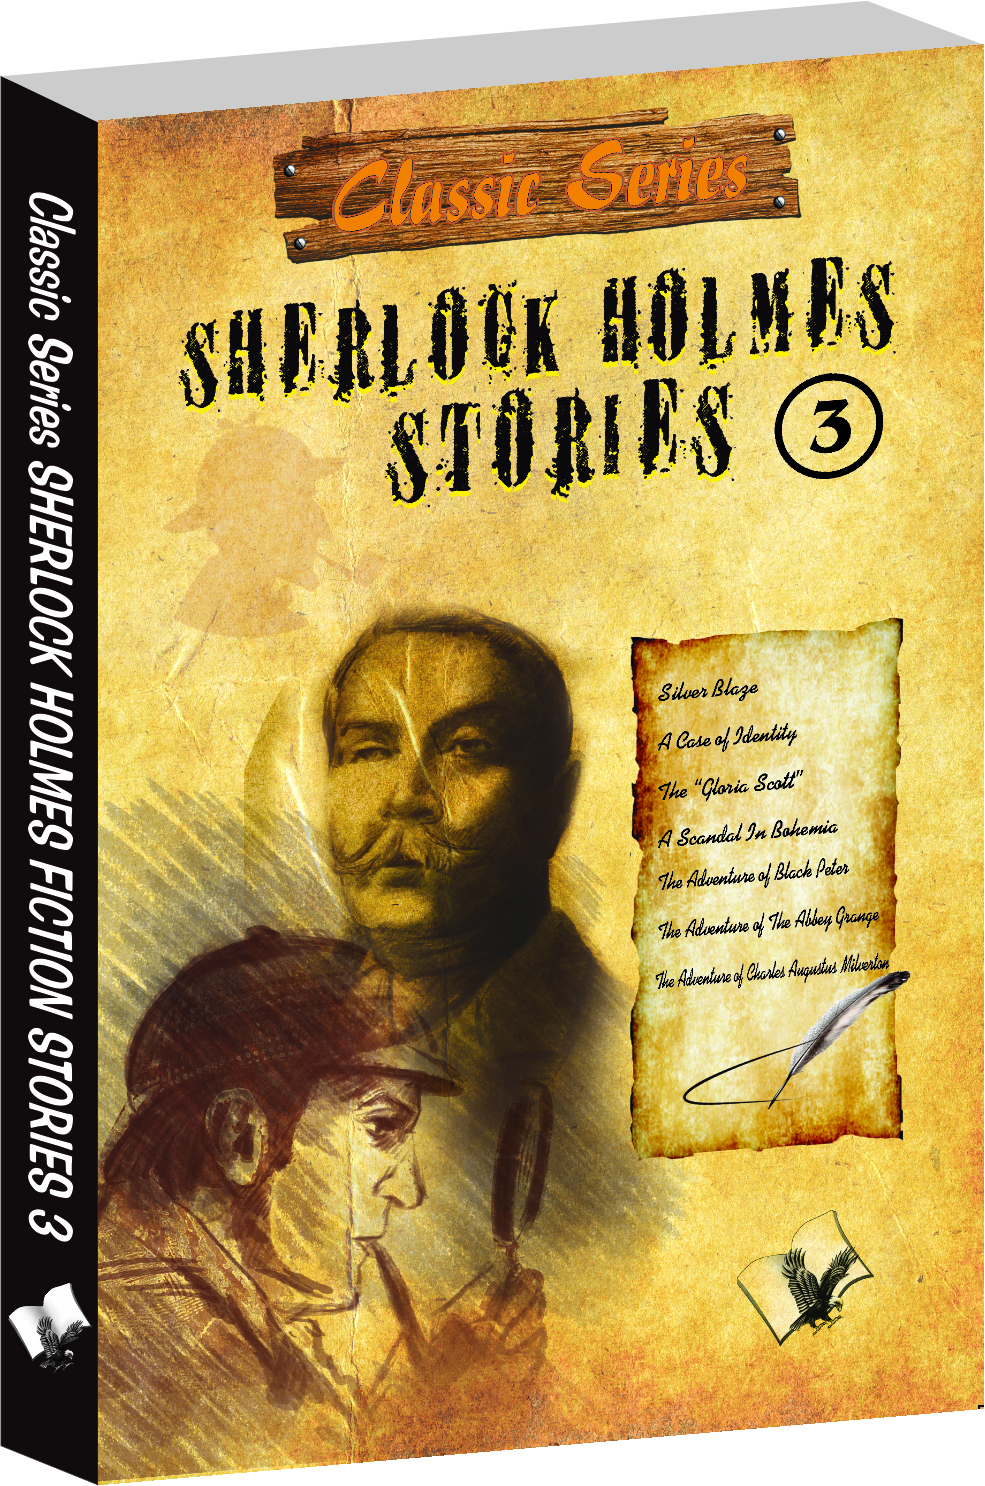 Sherlock Holmes Stories 3-Detective stories that will keep you glued to the seat till the end